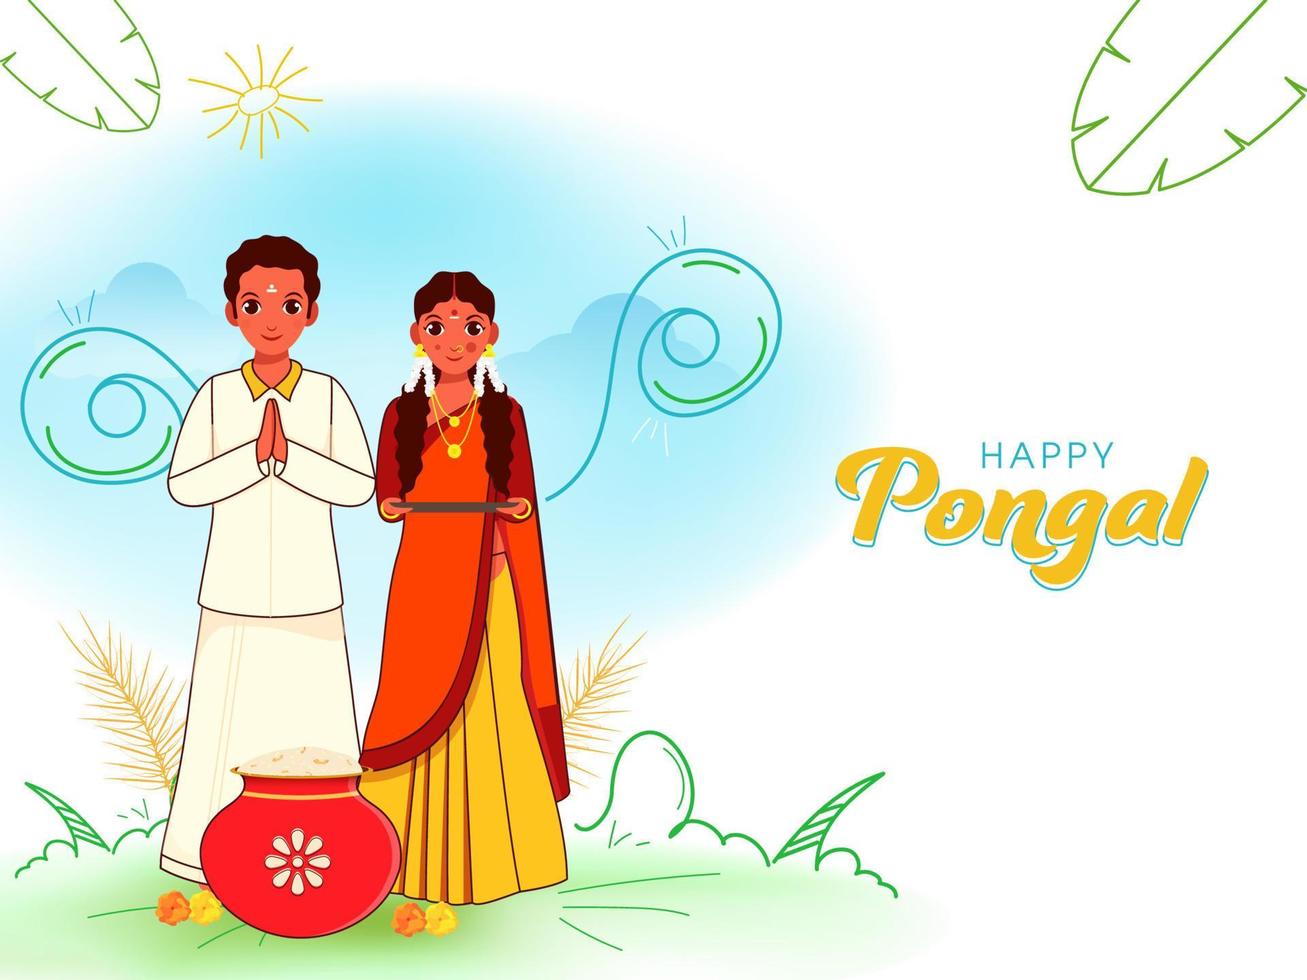 South Indian Couple Character With Traditional Dish Mud Pot On The Occasion Of Happy Pongal Celebration. vector